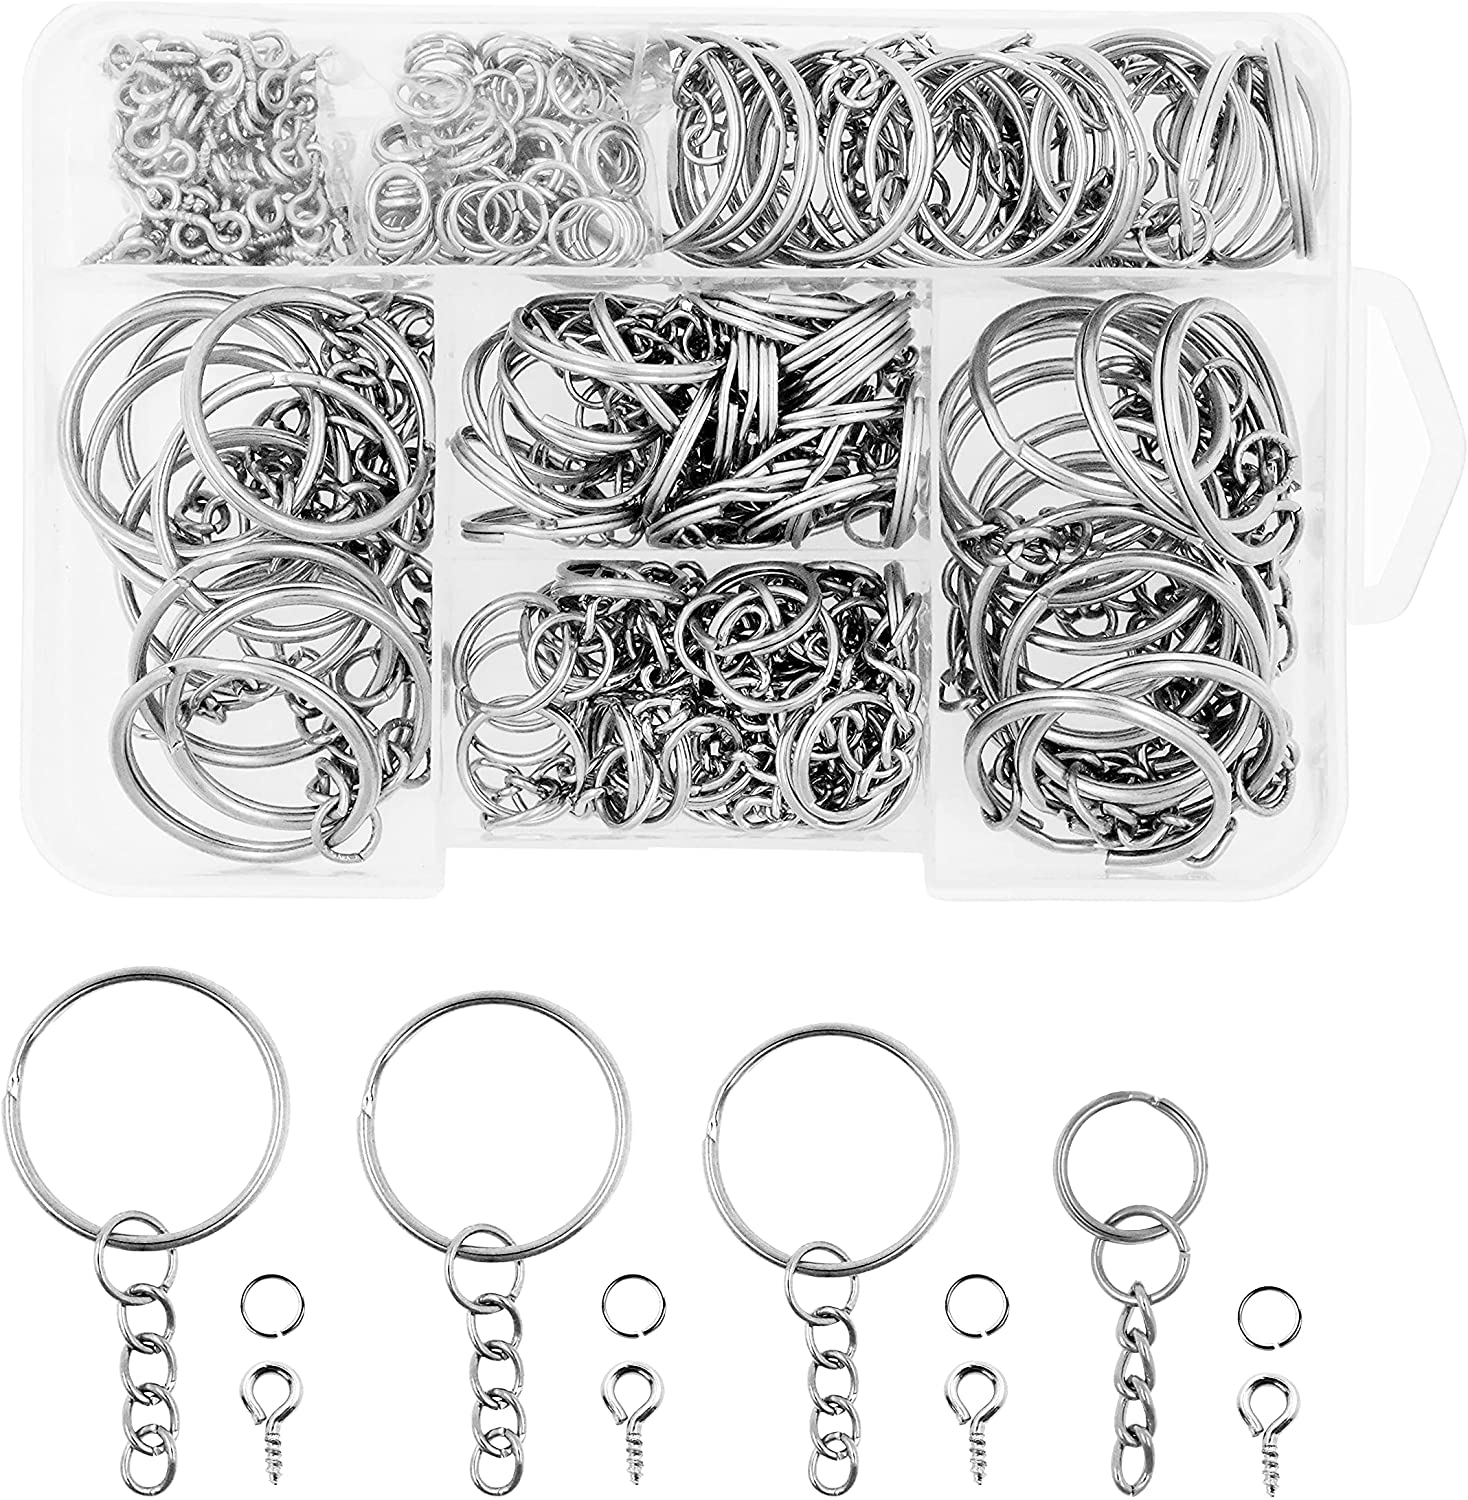 DIY Crafts Split Key Ring with Chain Set, Metal Flat Keychain Rings 1 Inch  with Open Jump Rings and Screw Eye Pins Bulk, Colors Choice, for Resin  Jewelry Making (1 Pc, Antique